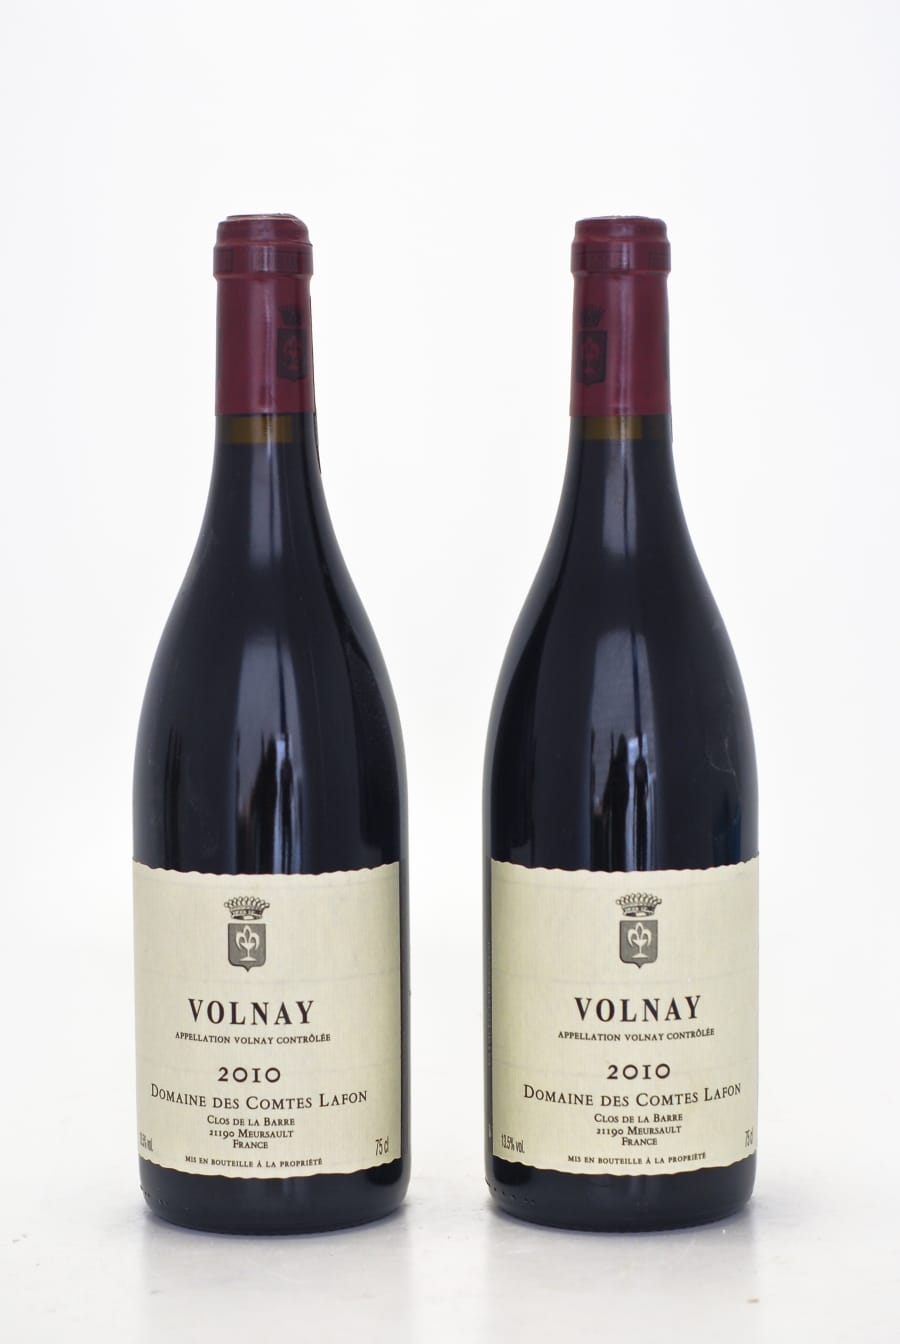 Domaines des Comtes Lafon - Volnay 2010 From Original Wooden Case